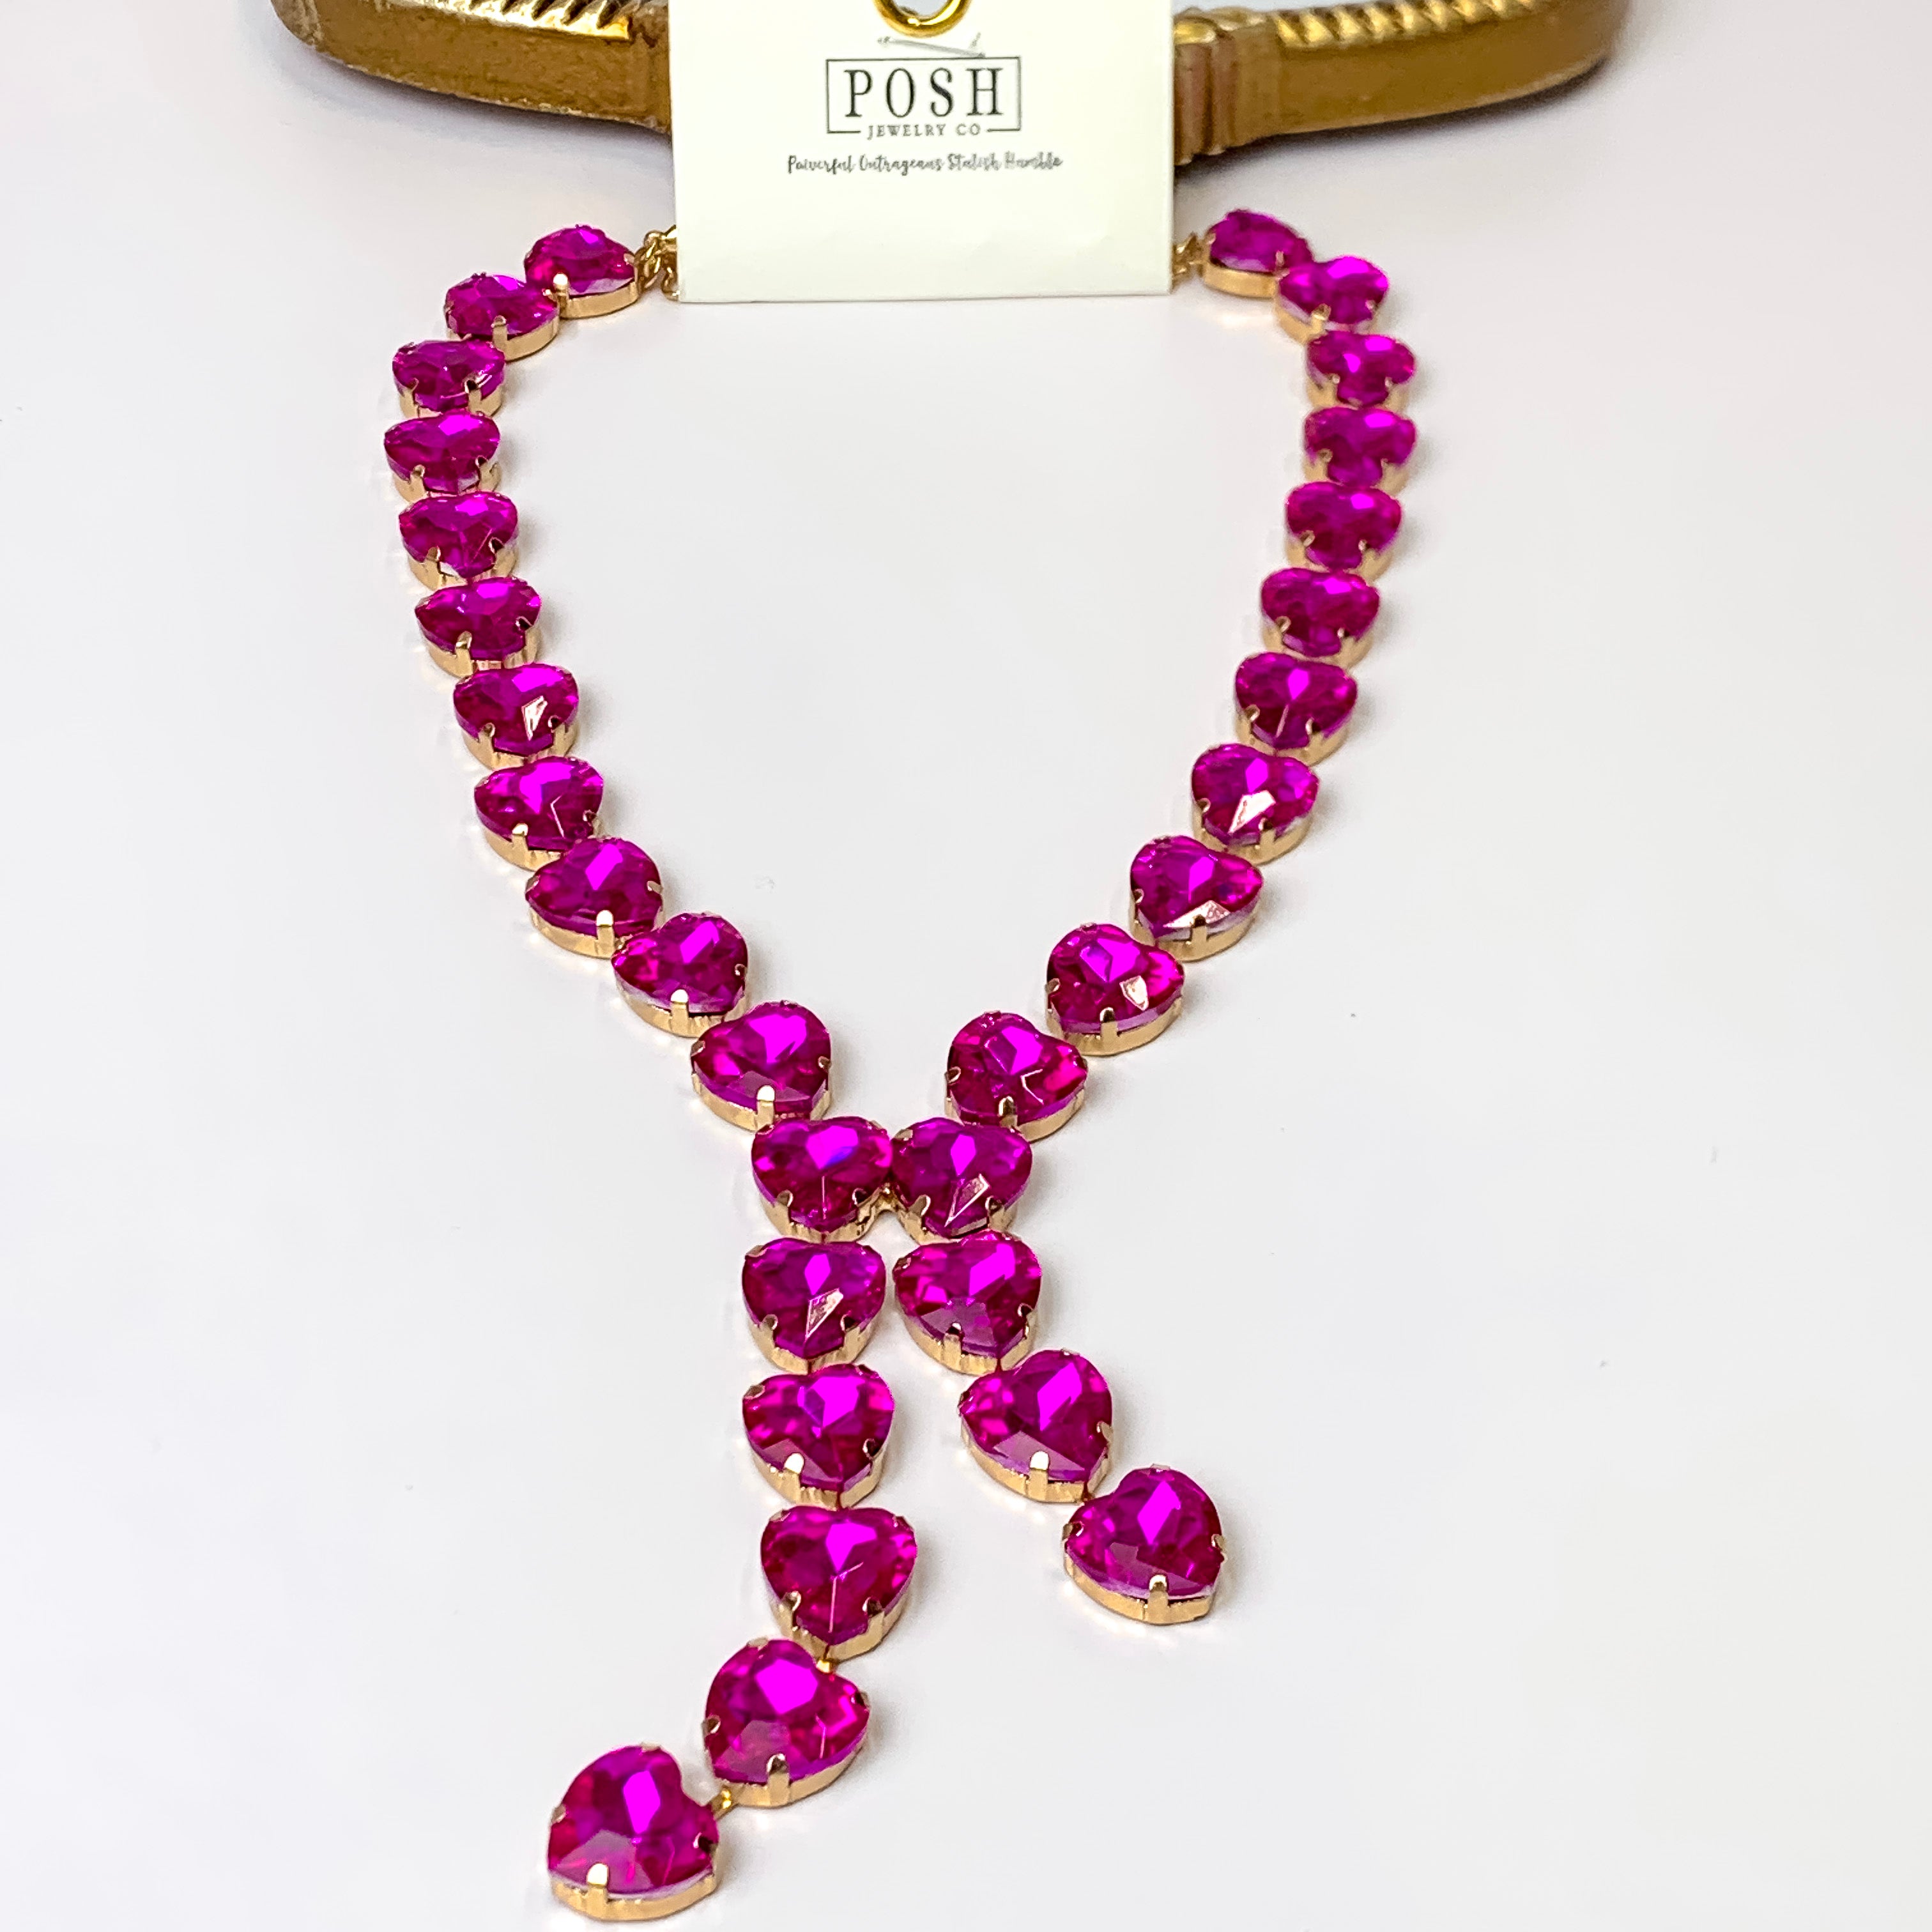 Posh by Pink Panache | Gold Tone Heart Shaped Fuchsia Crystal Lariat Necklace - Giddy Up Glamour Boutique